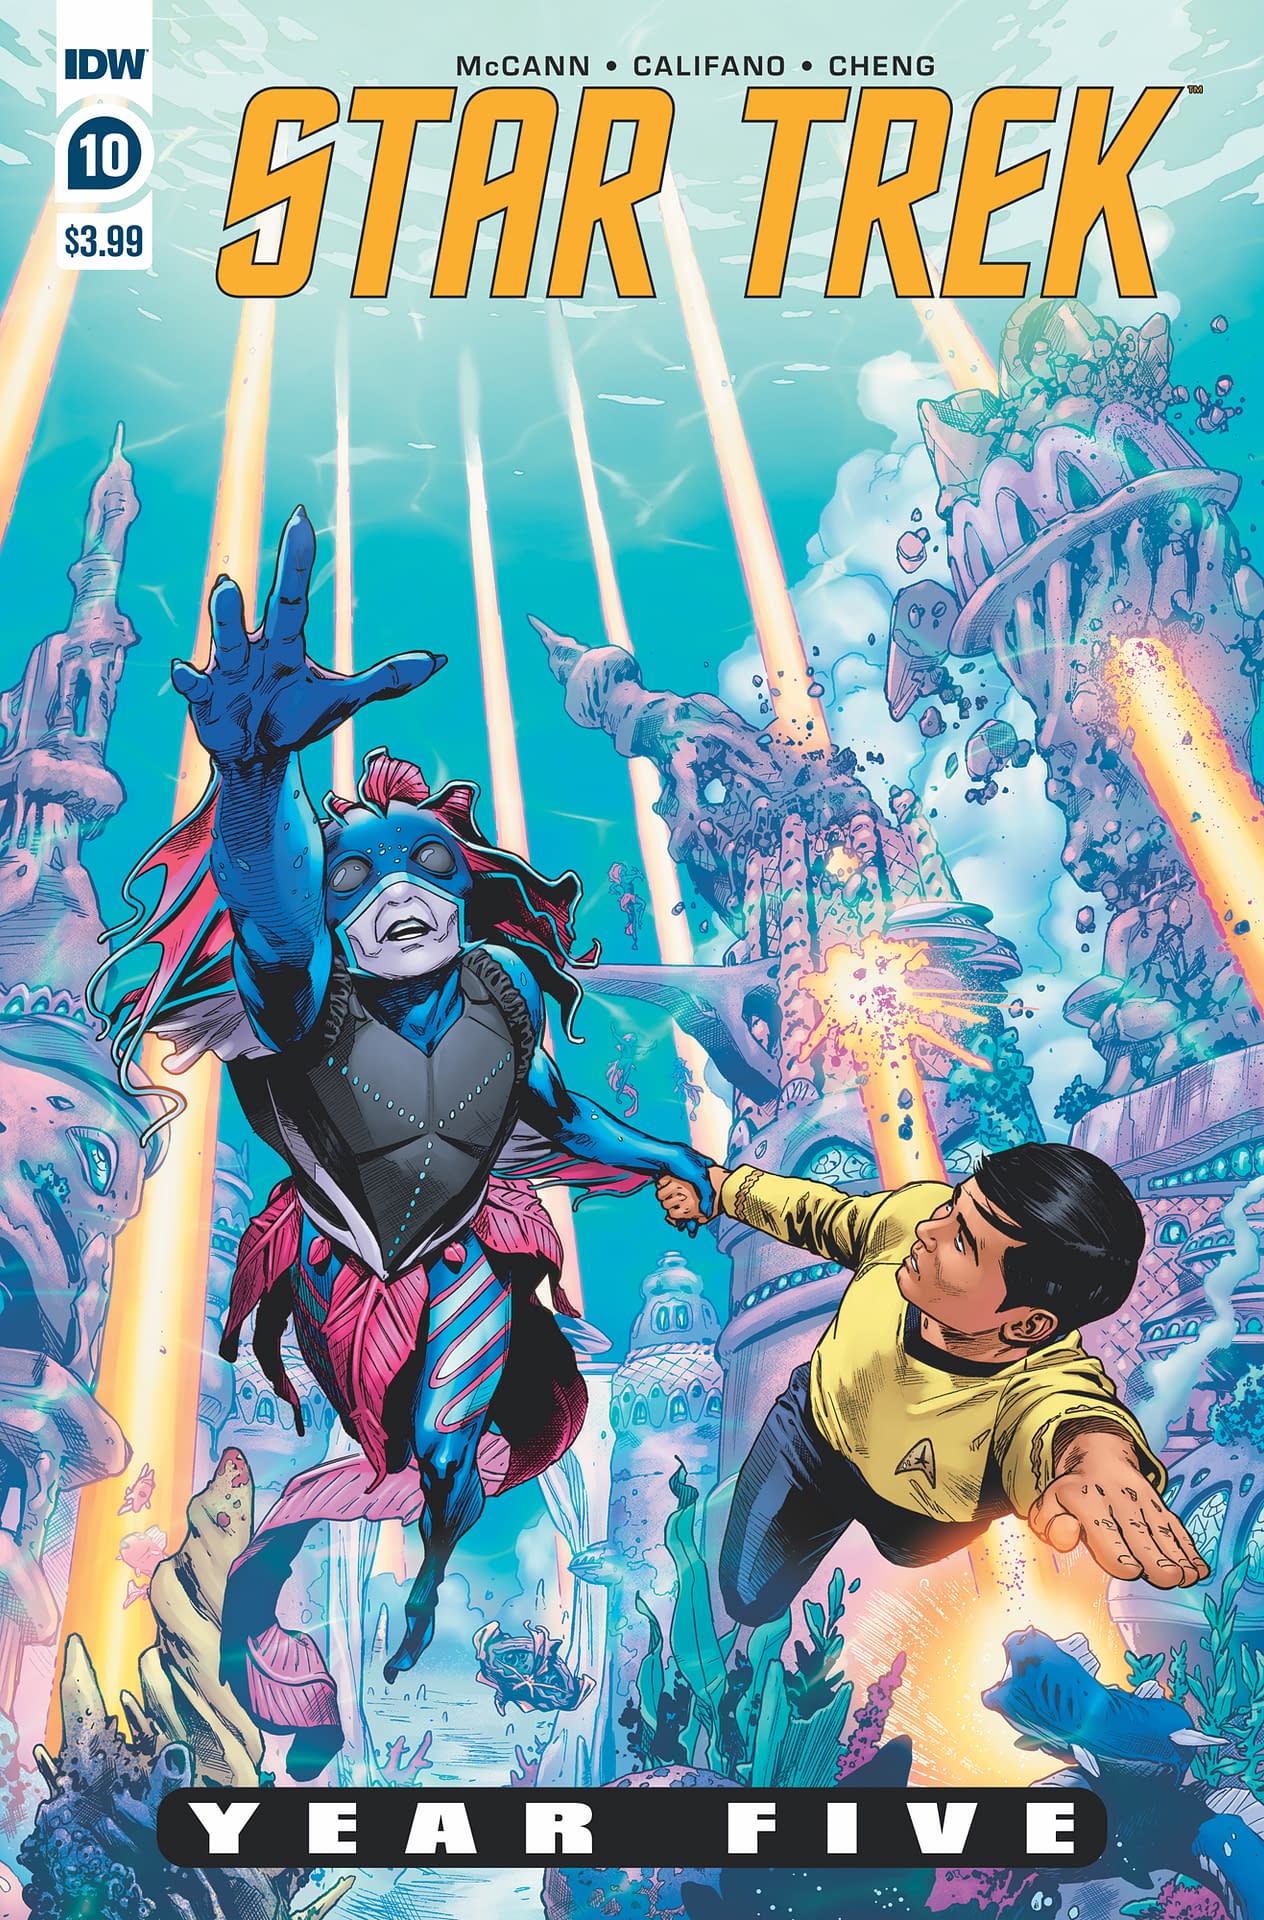 REVIEW: Star Trek Year Five #10 -- "The Plot Kind Of Pushes All The Dishes Off The Table"